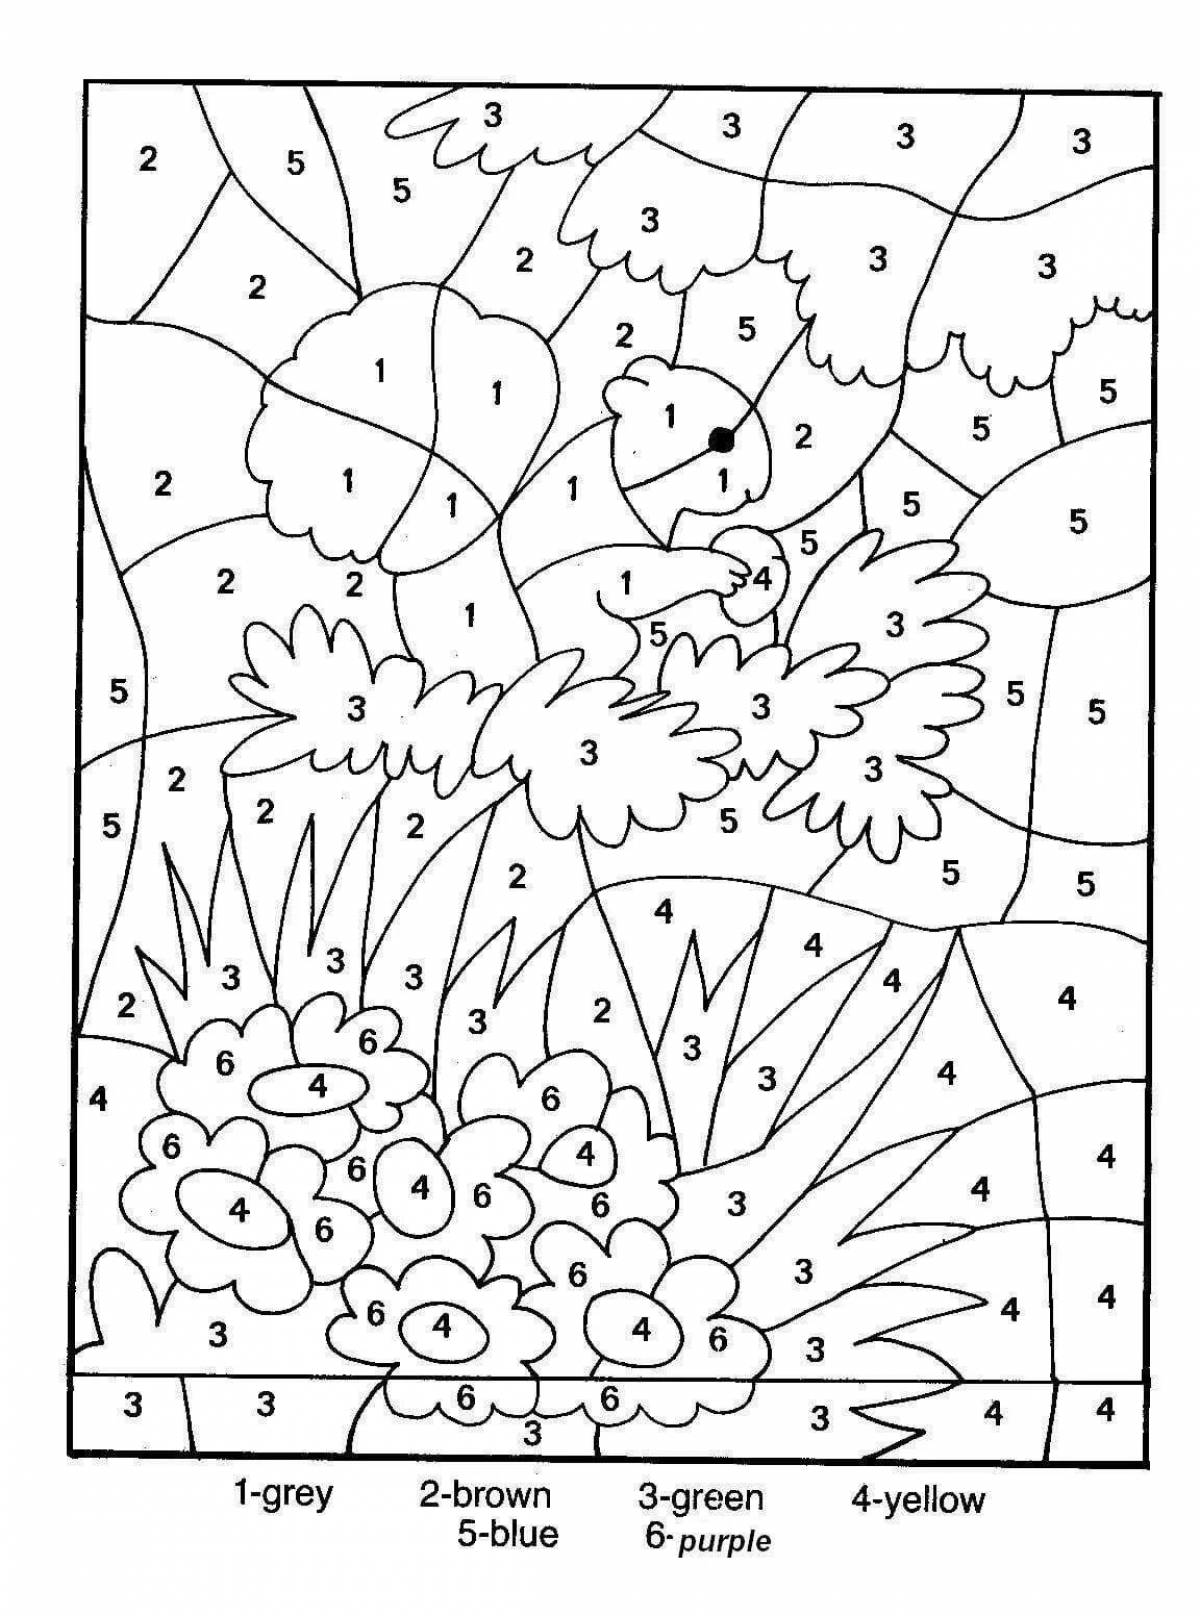 Dazzling coloring book for kids